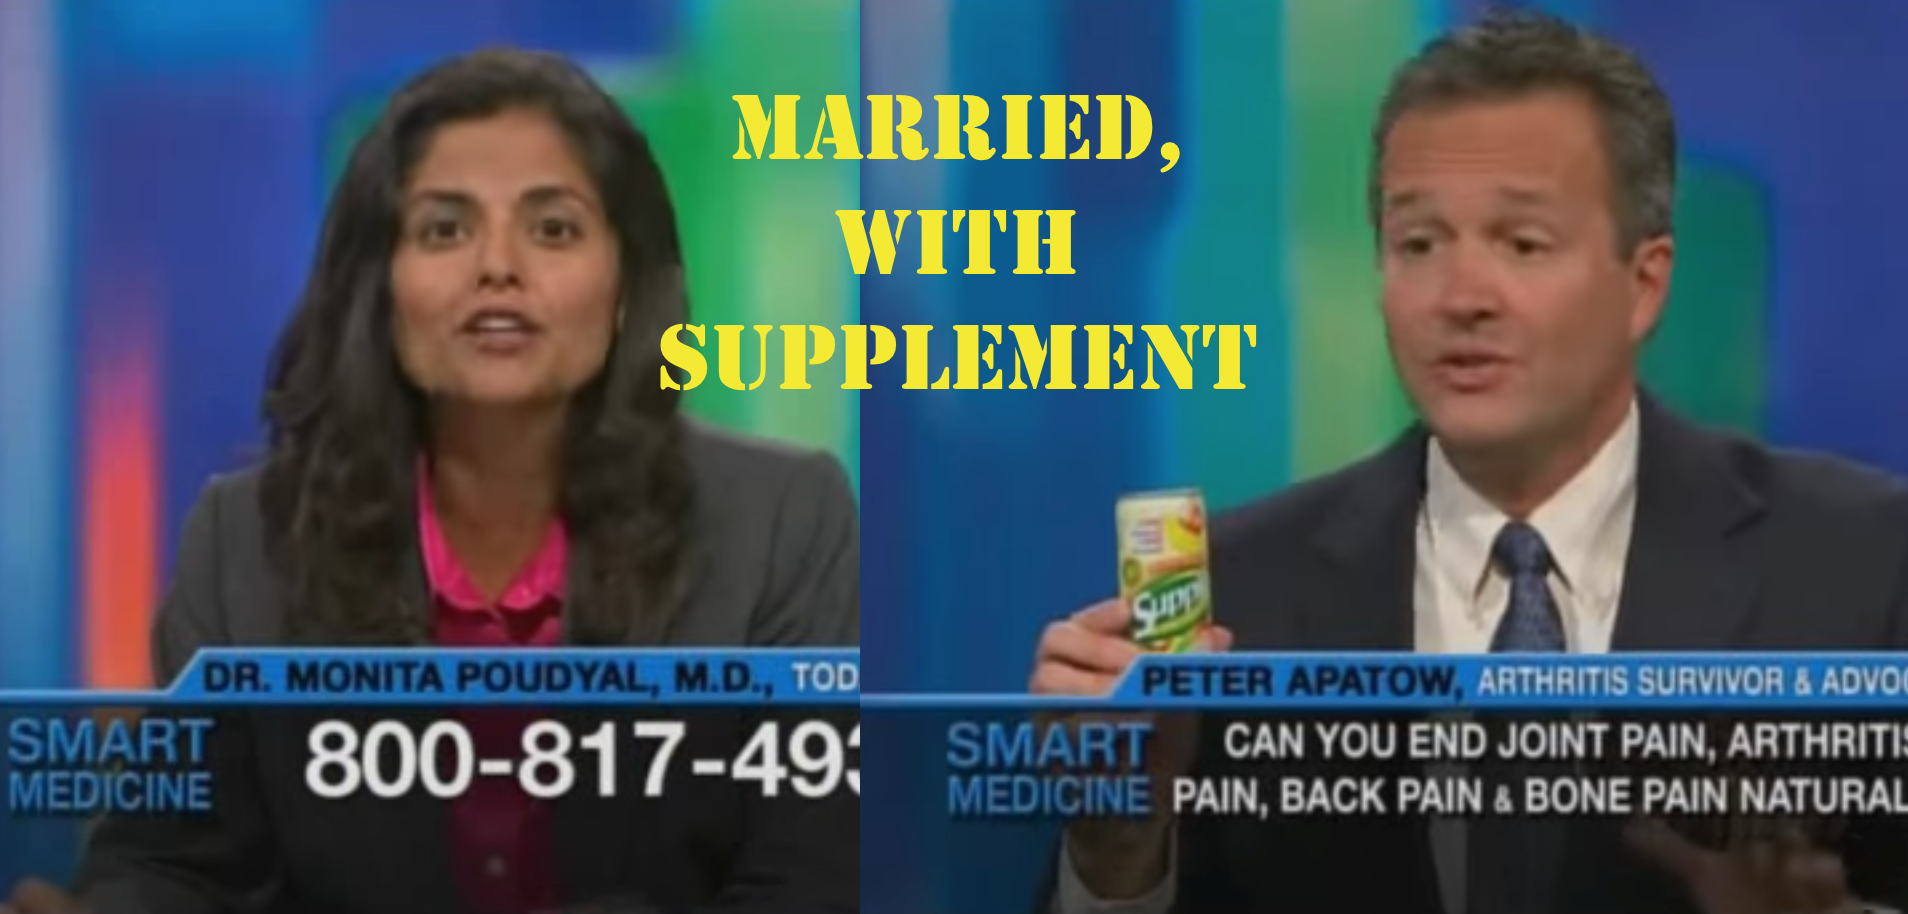 Doctor Who Endorsed Sketchy Joint Pain Supplement Failed To Mention She Was Married To Company’s Owner